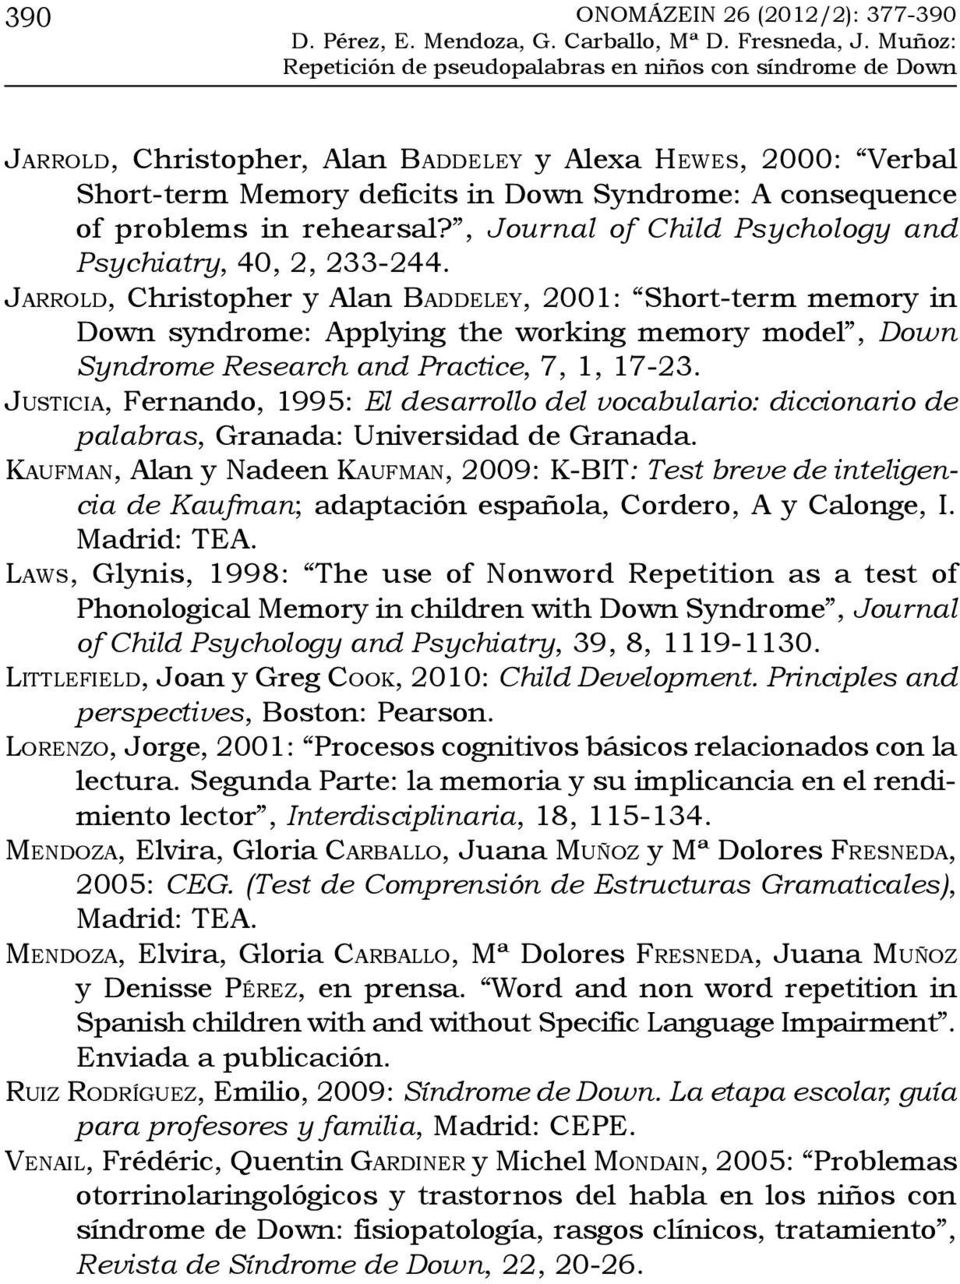 Jarrold, Christopher y Alan baddeley, 2001: Short-term memory in Down syndrome: Applying the working memory model, Down Syndrome Research and Practice, 7, 1, 17-23.